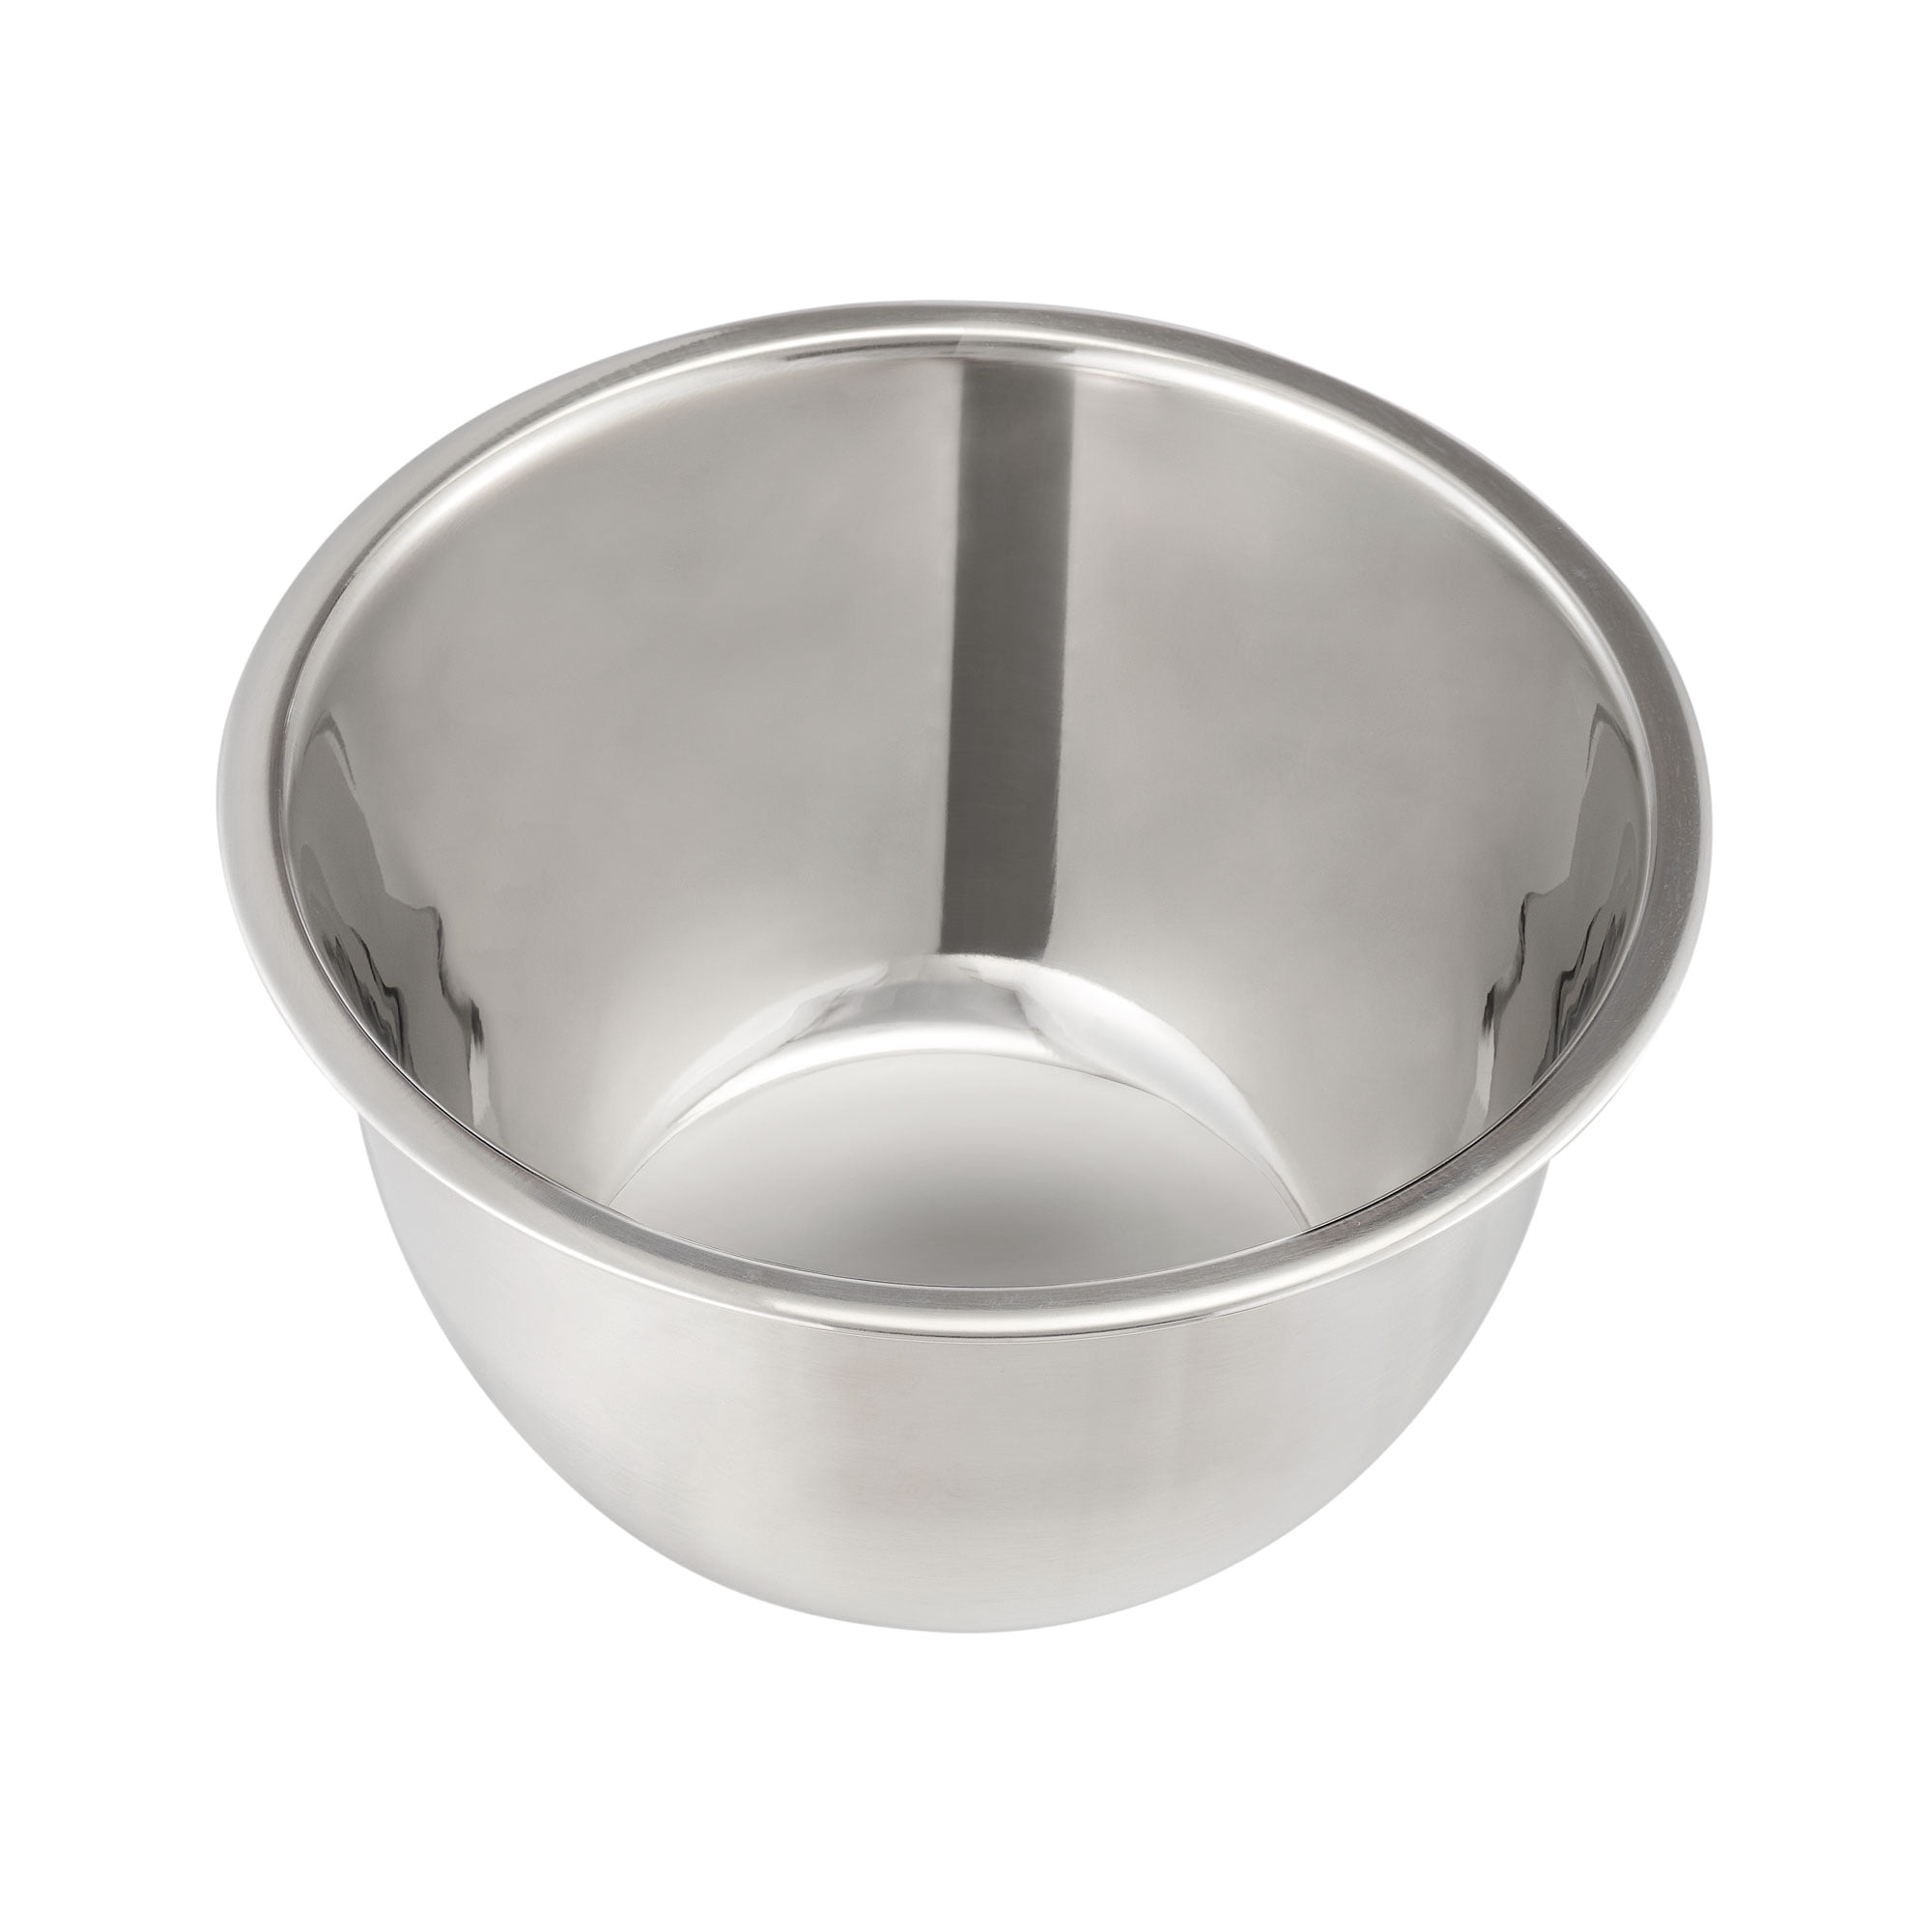 Bosch MUM9AX5S00 Kitchen Mixing Bowl Stainless Steel